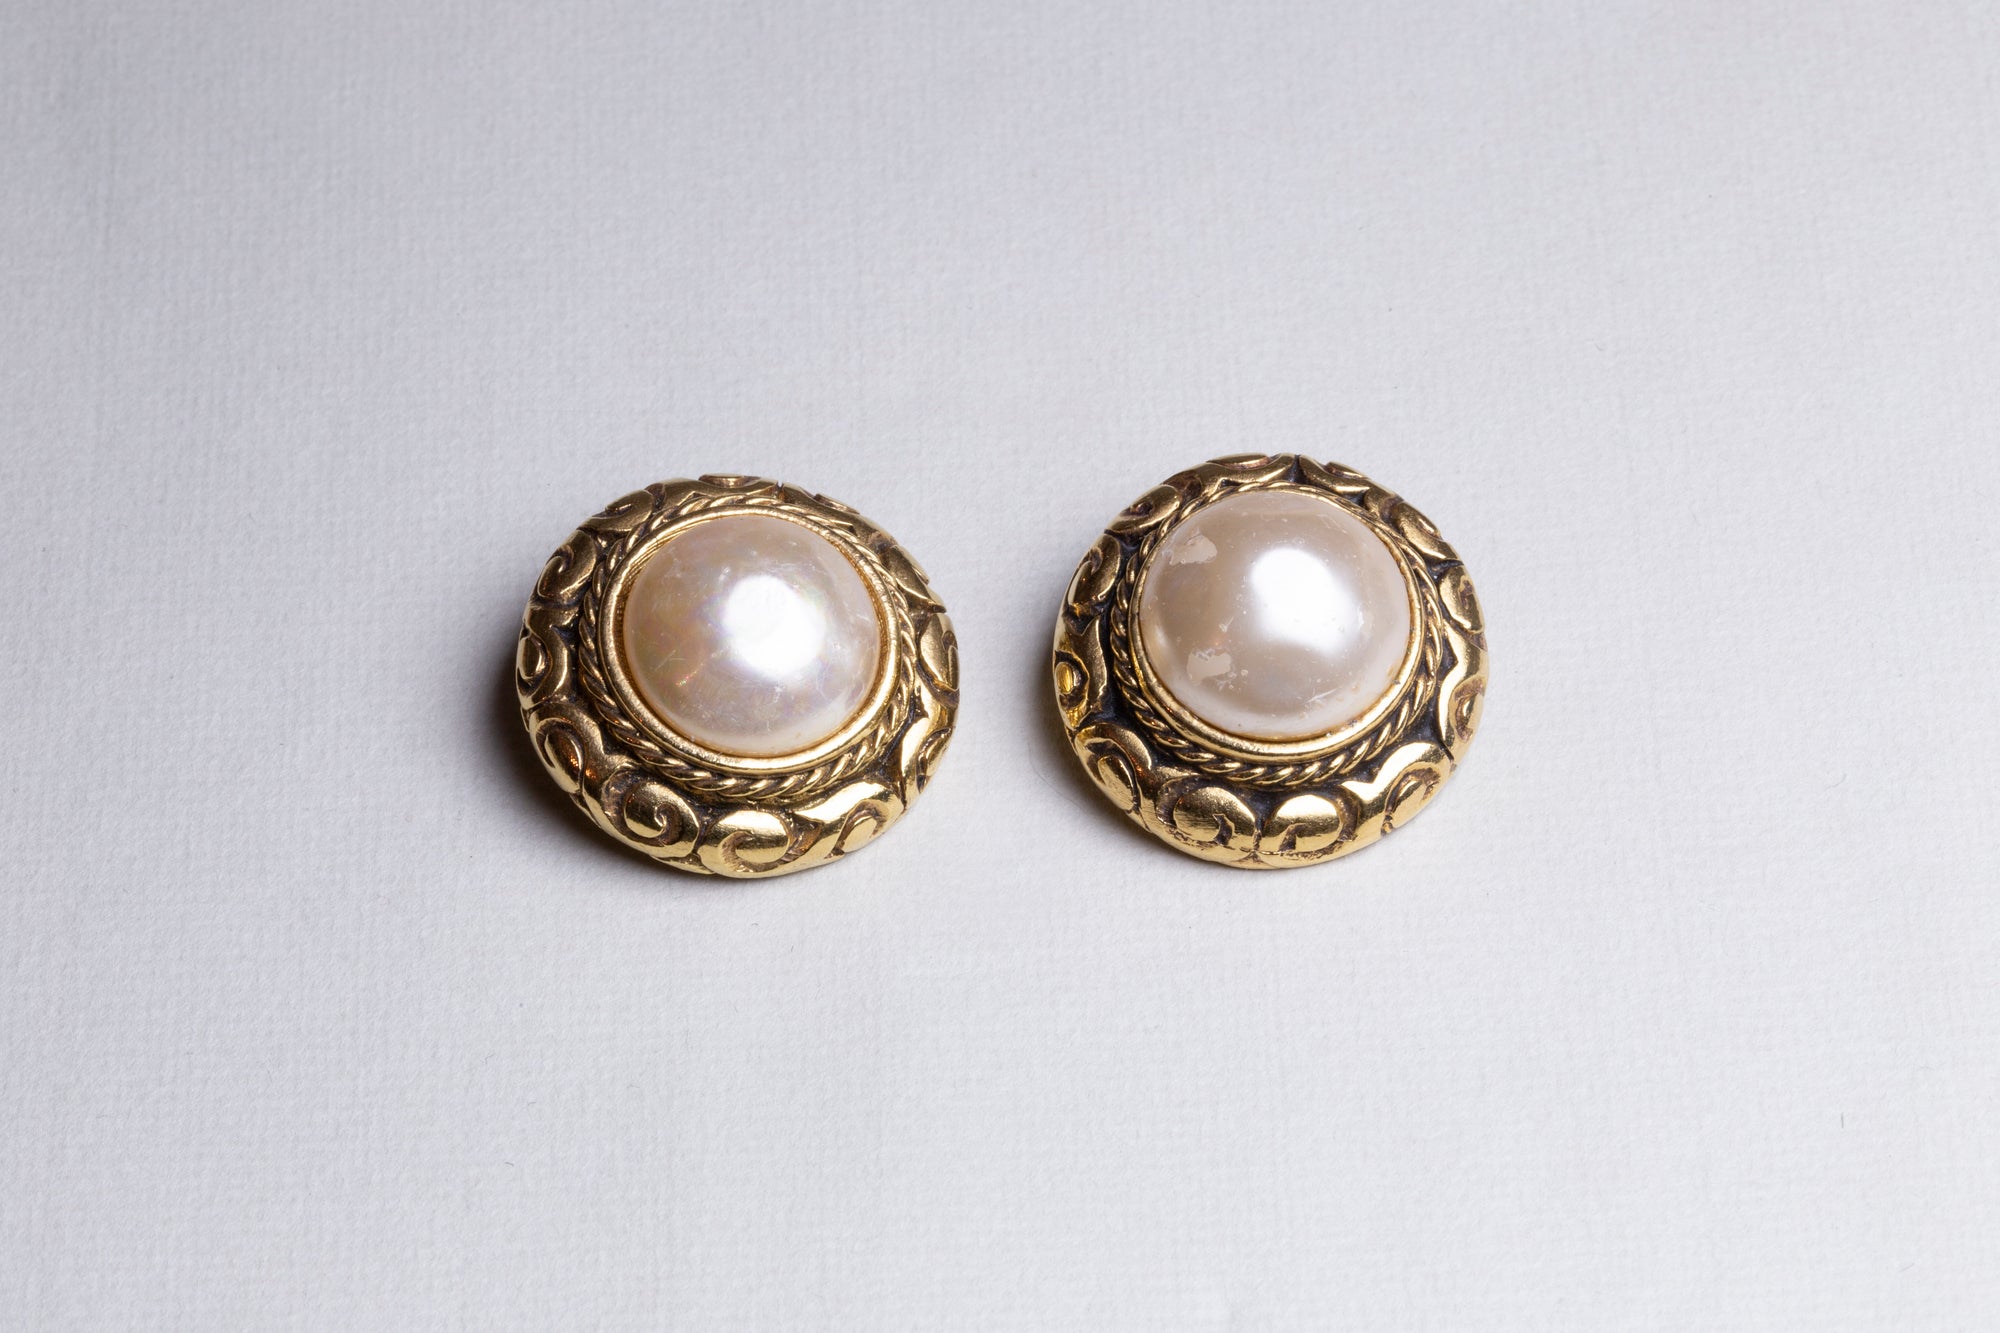 Vintage Chanel Clip-on Earrings with Pearls